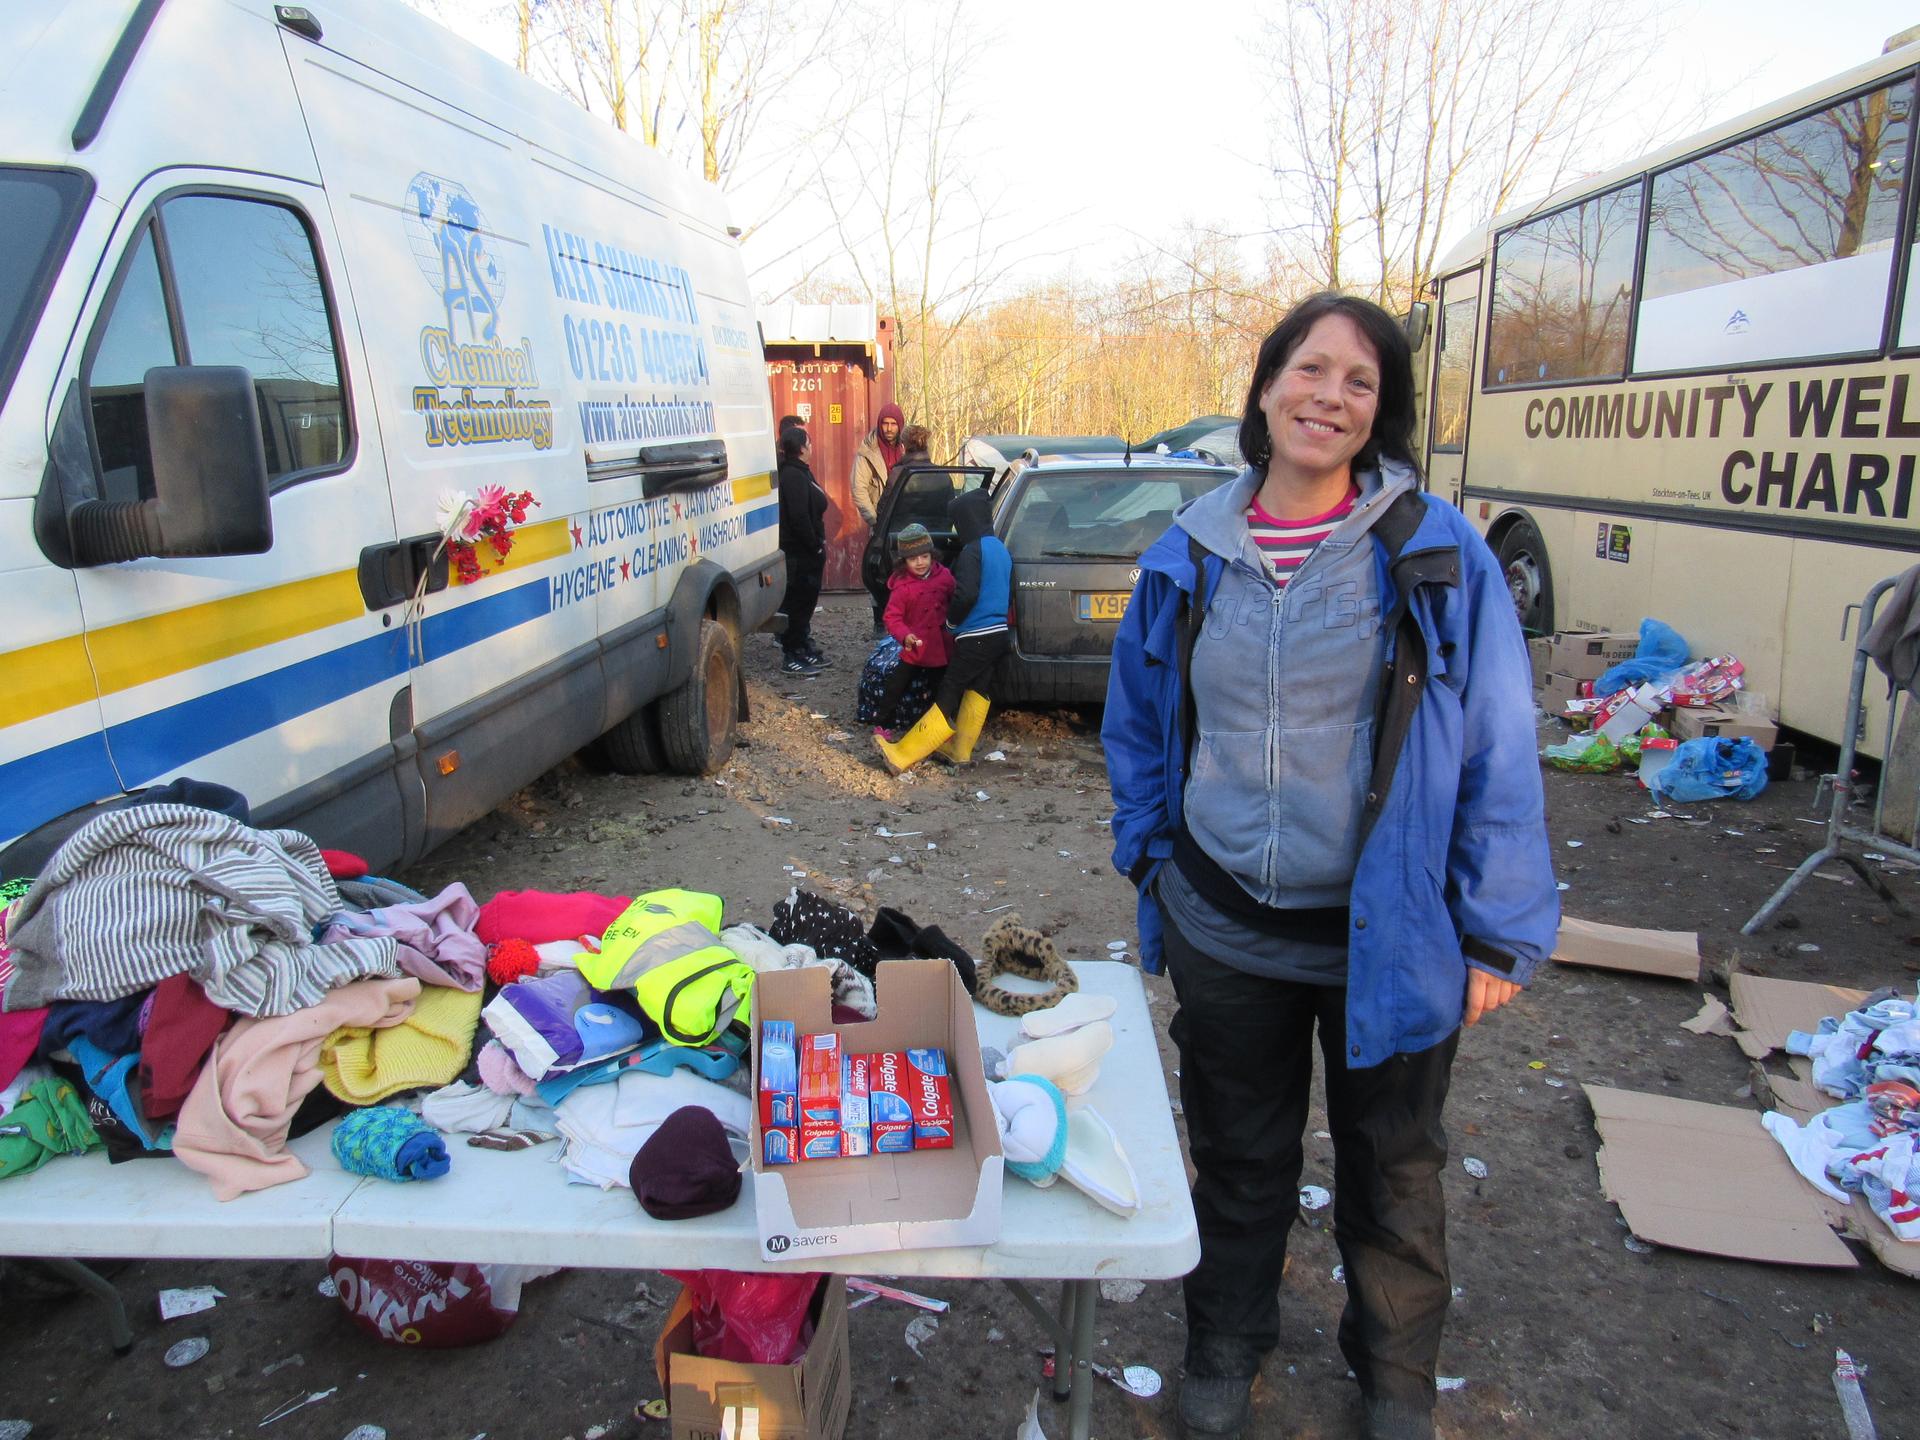 British volunteer Tally Oliver took a leave from her job in the UK and loaded her car with provisions to help migrant families in the camp at Grande-Synthe. "It's a humanitarian crisis that we all have to take responsibility for."